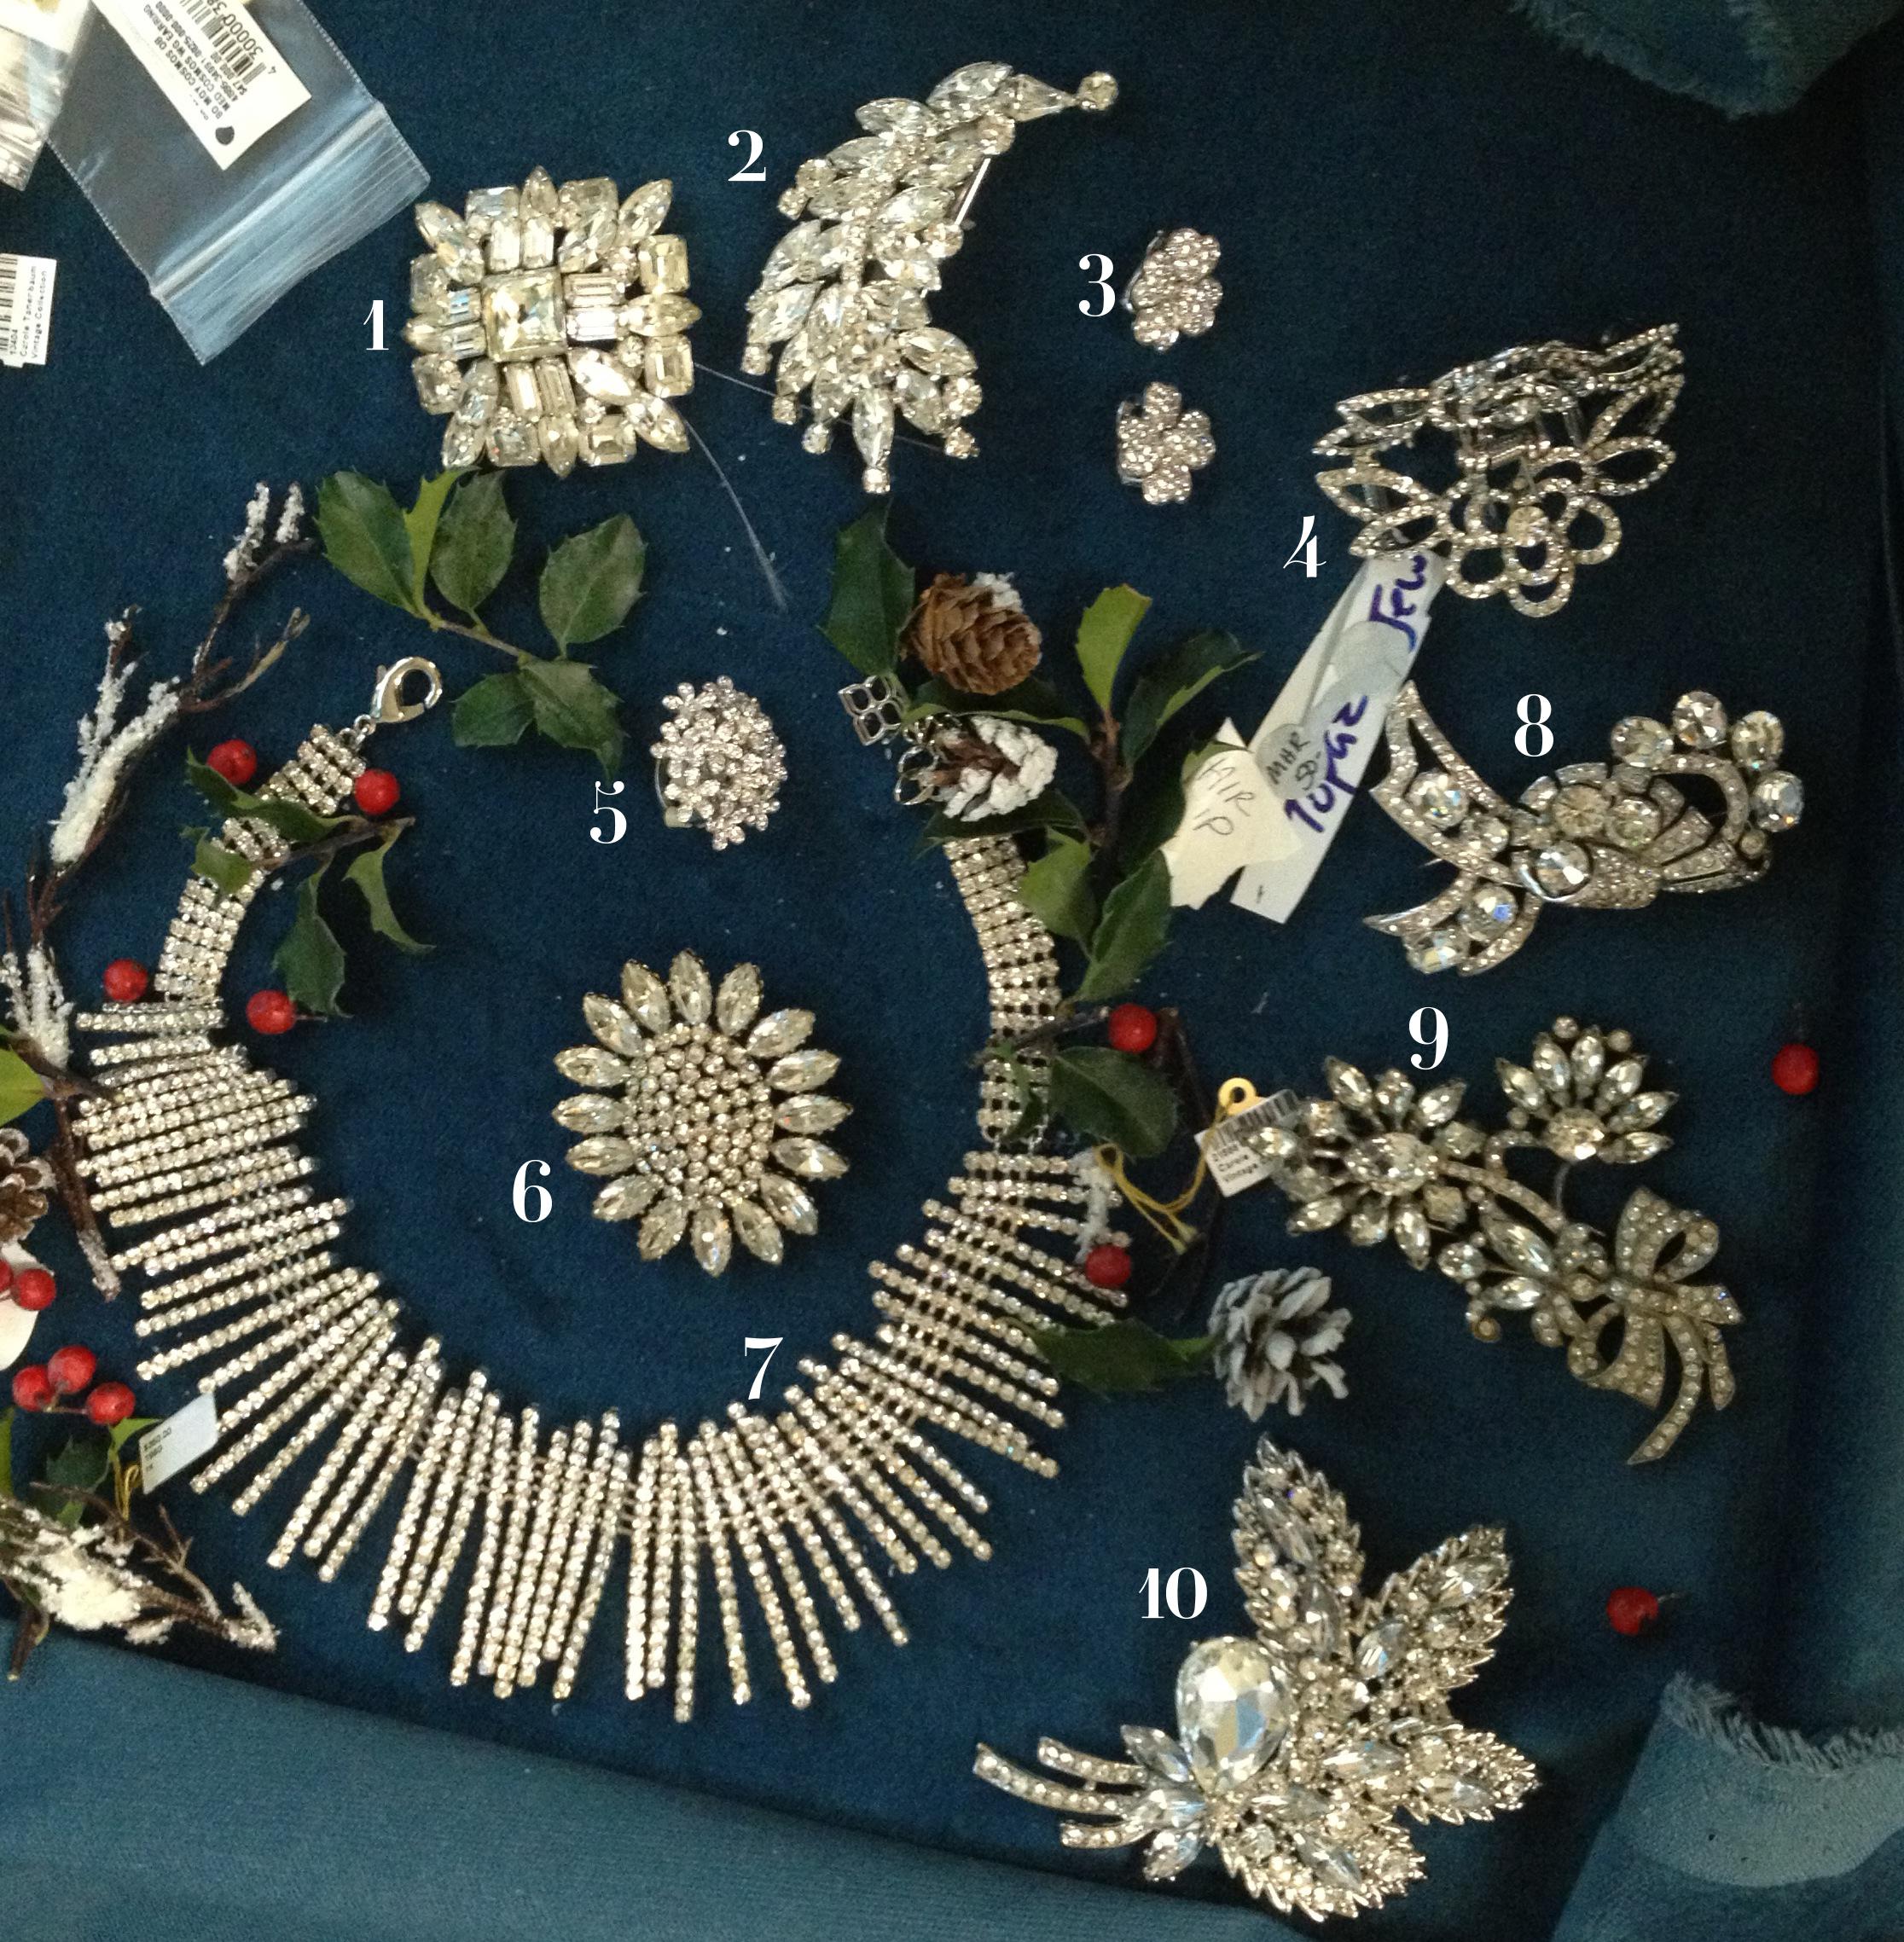 Cover wreath with jewellery from December 2012 issue